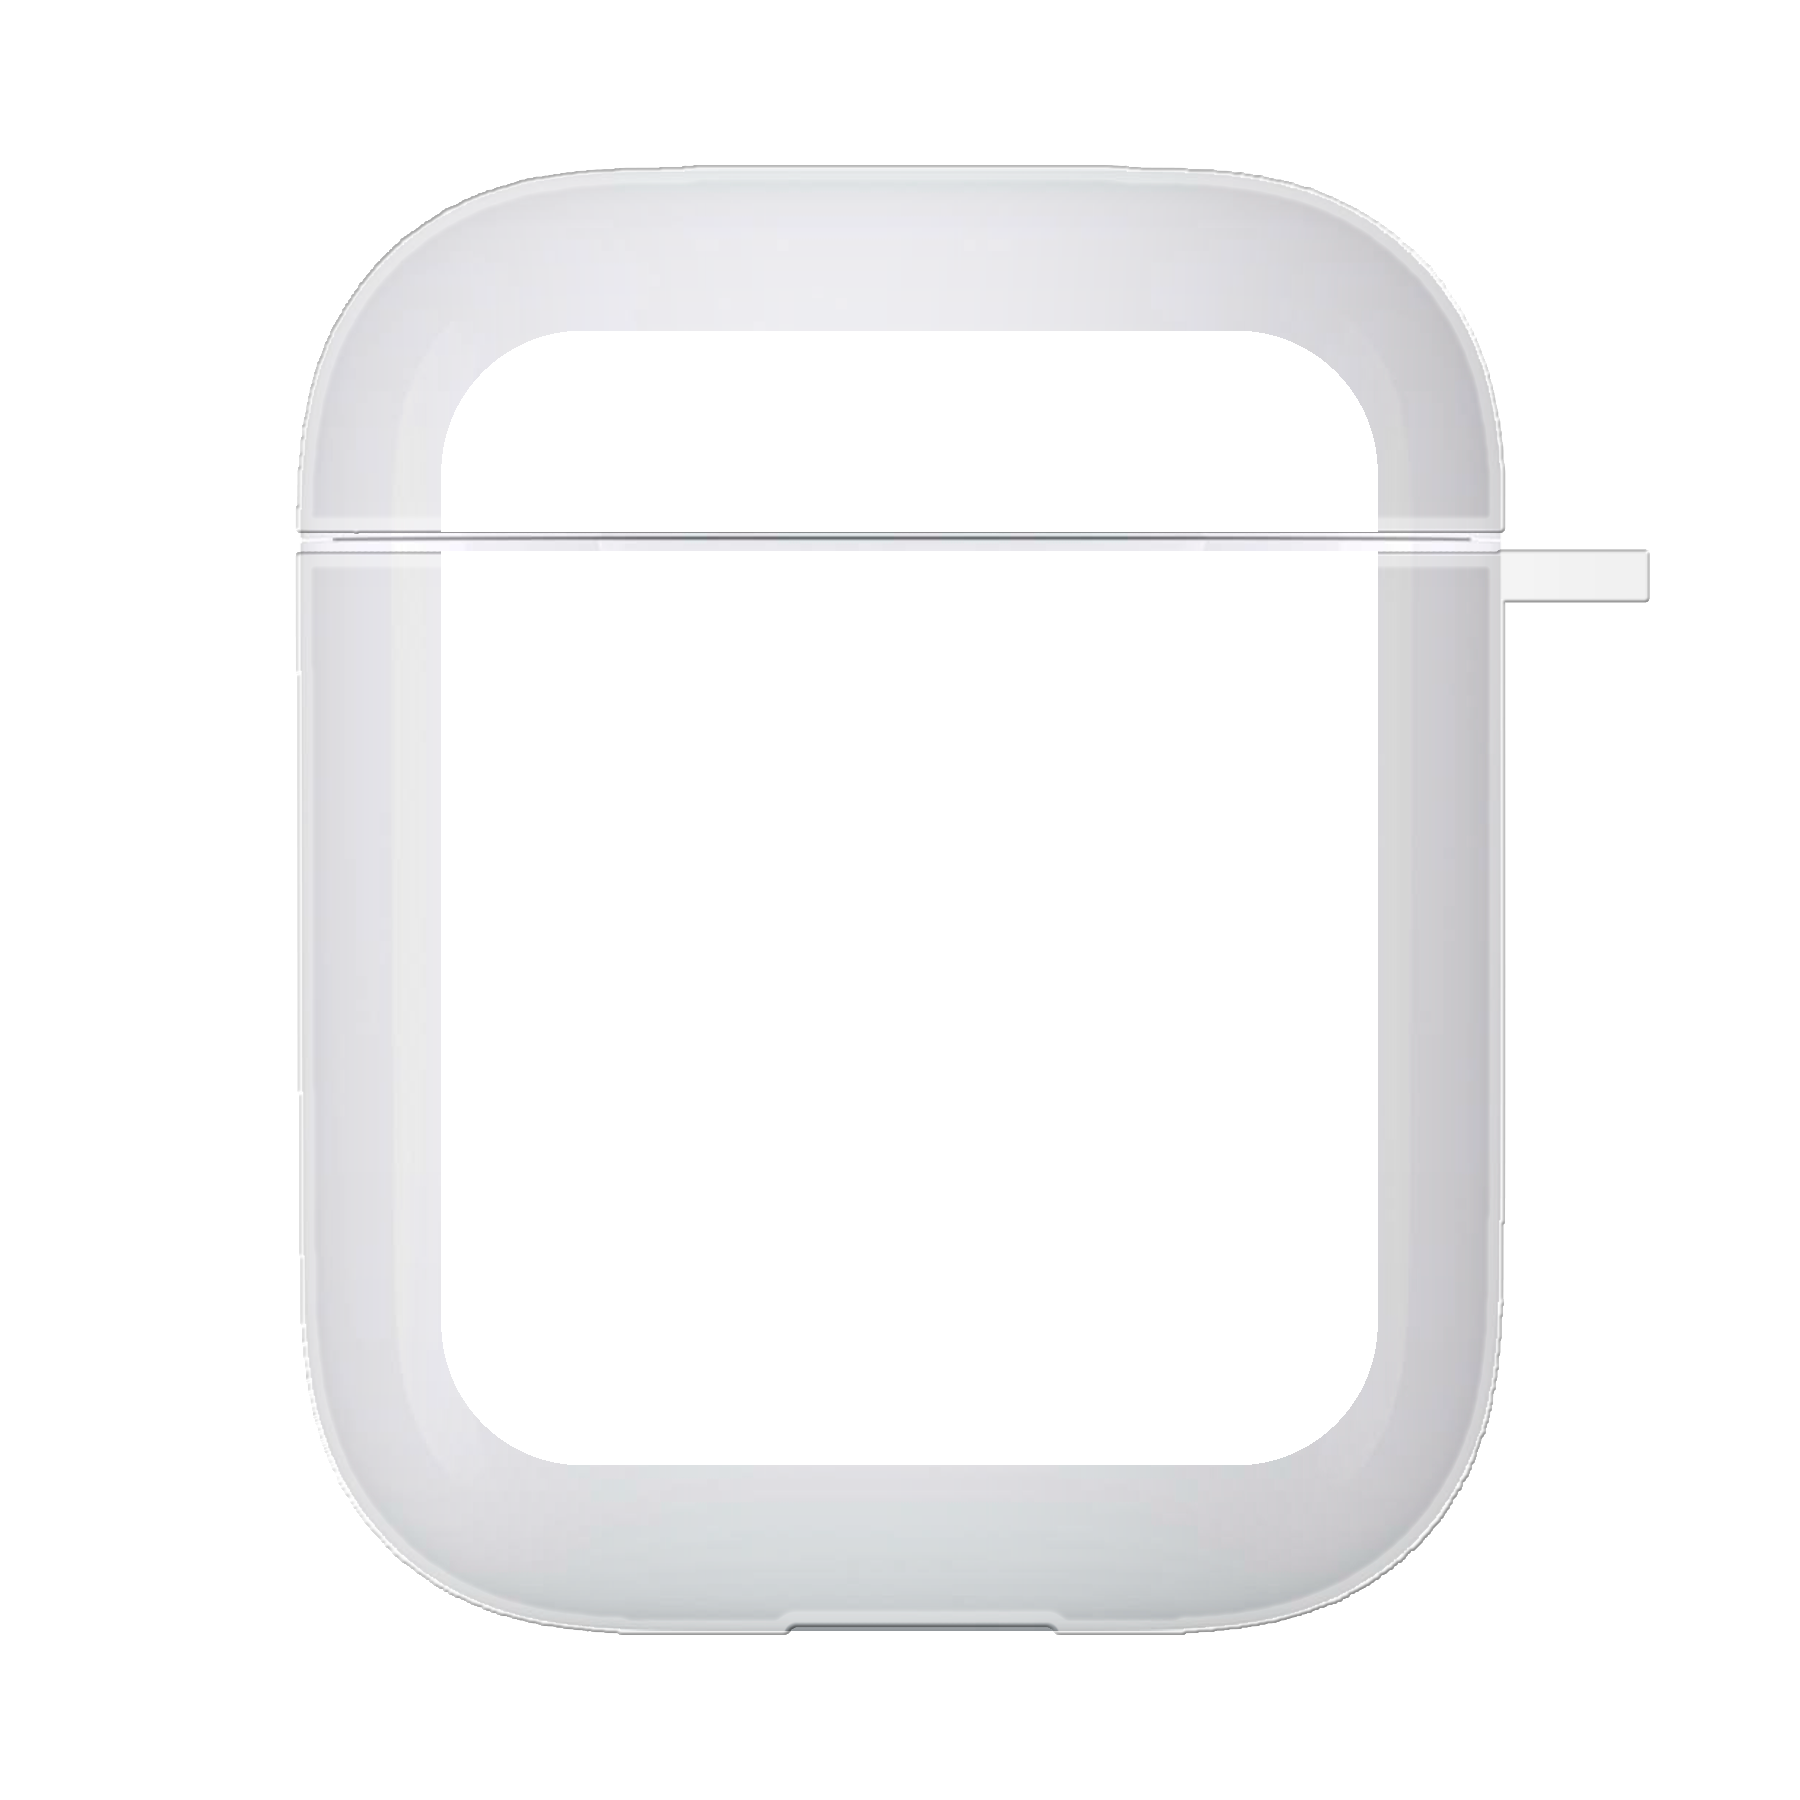 Apple Airpods 2 Soft case (front printed, transparent)